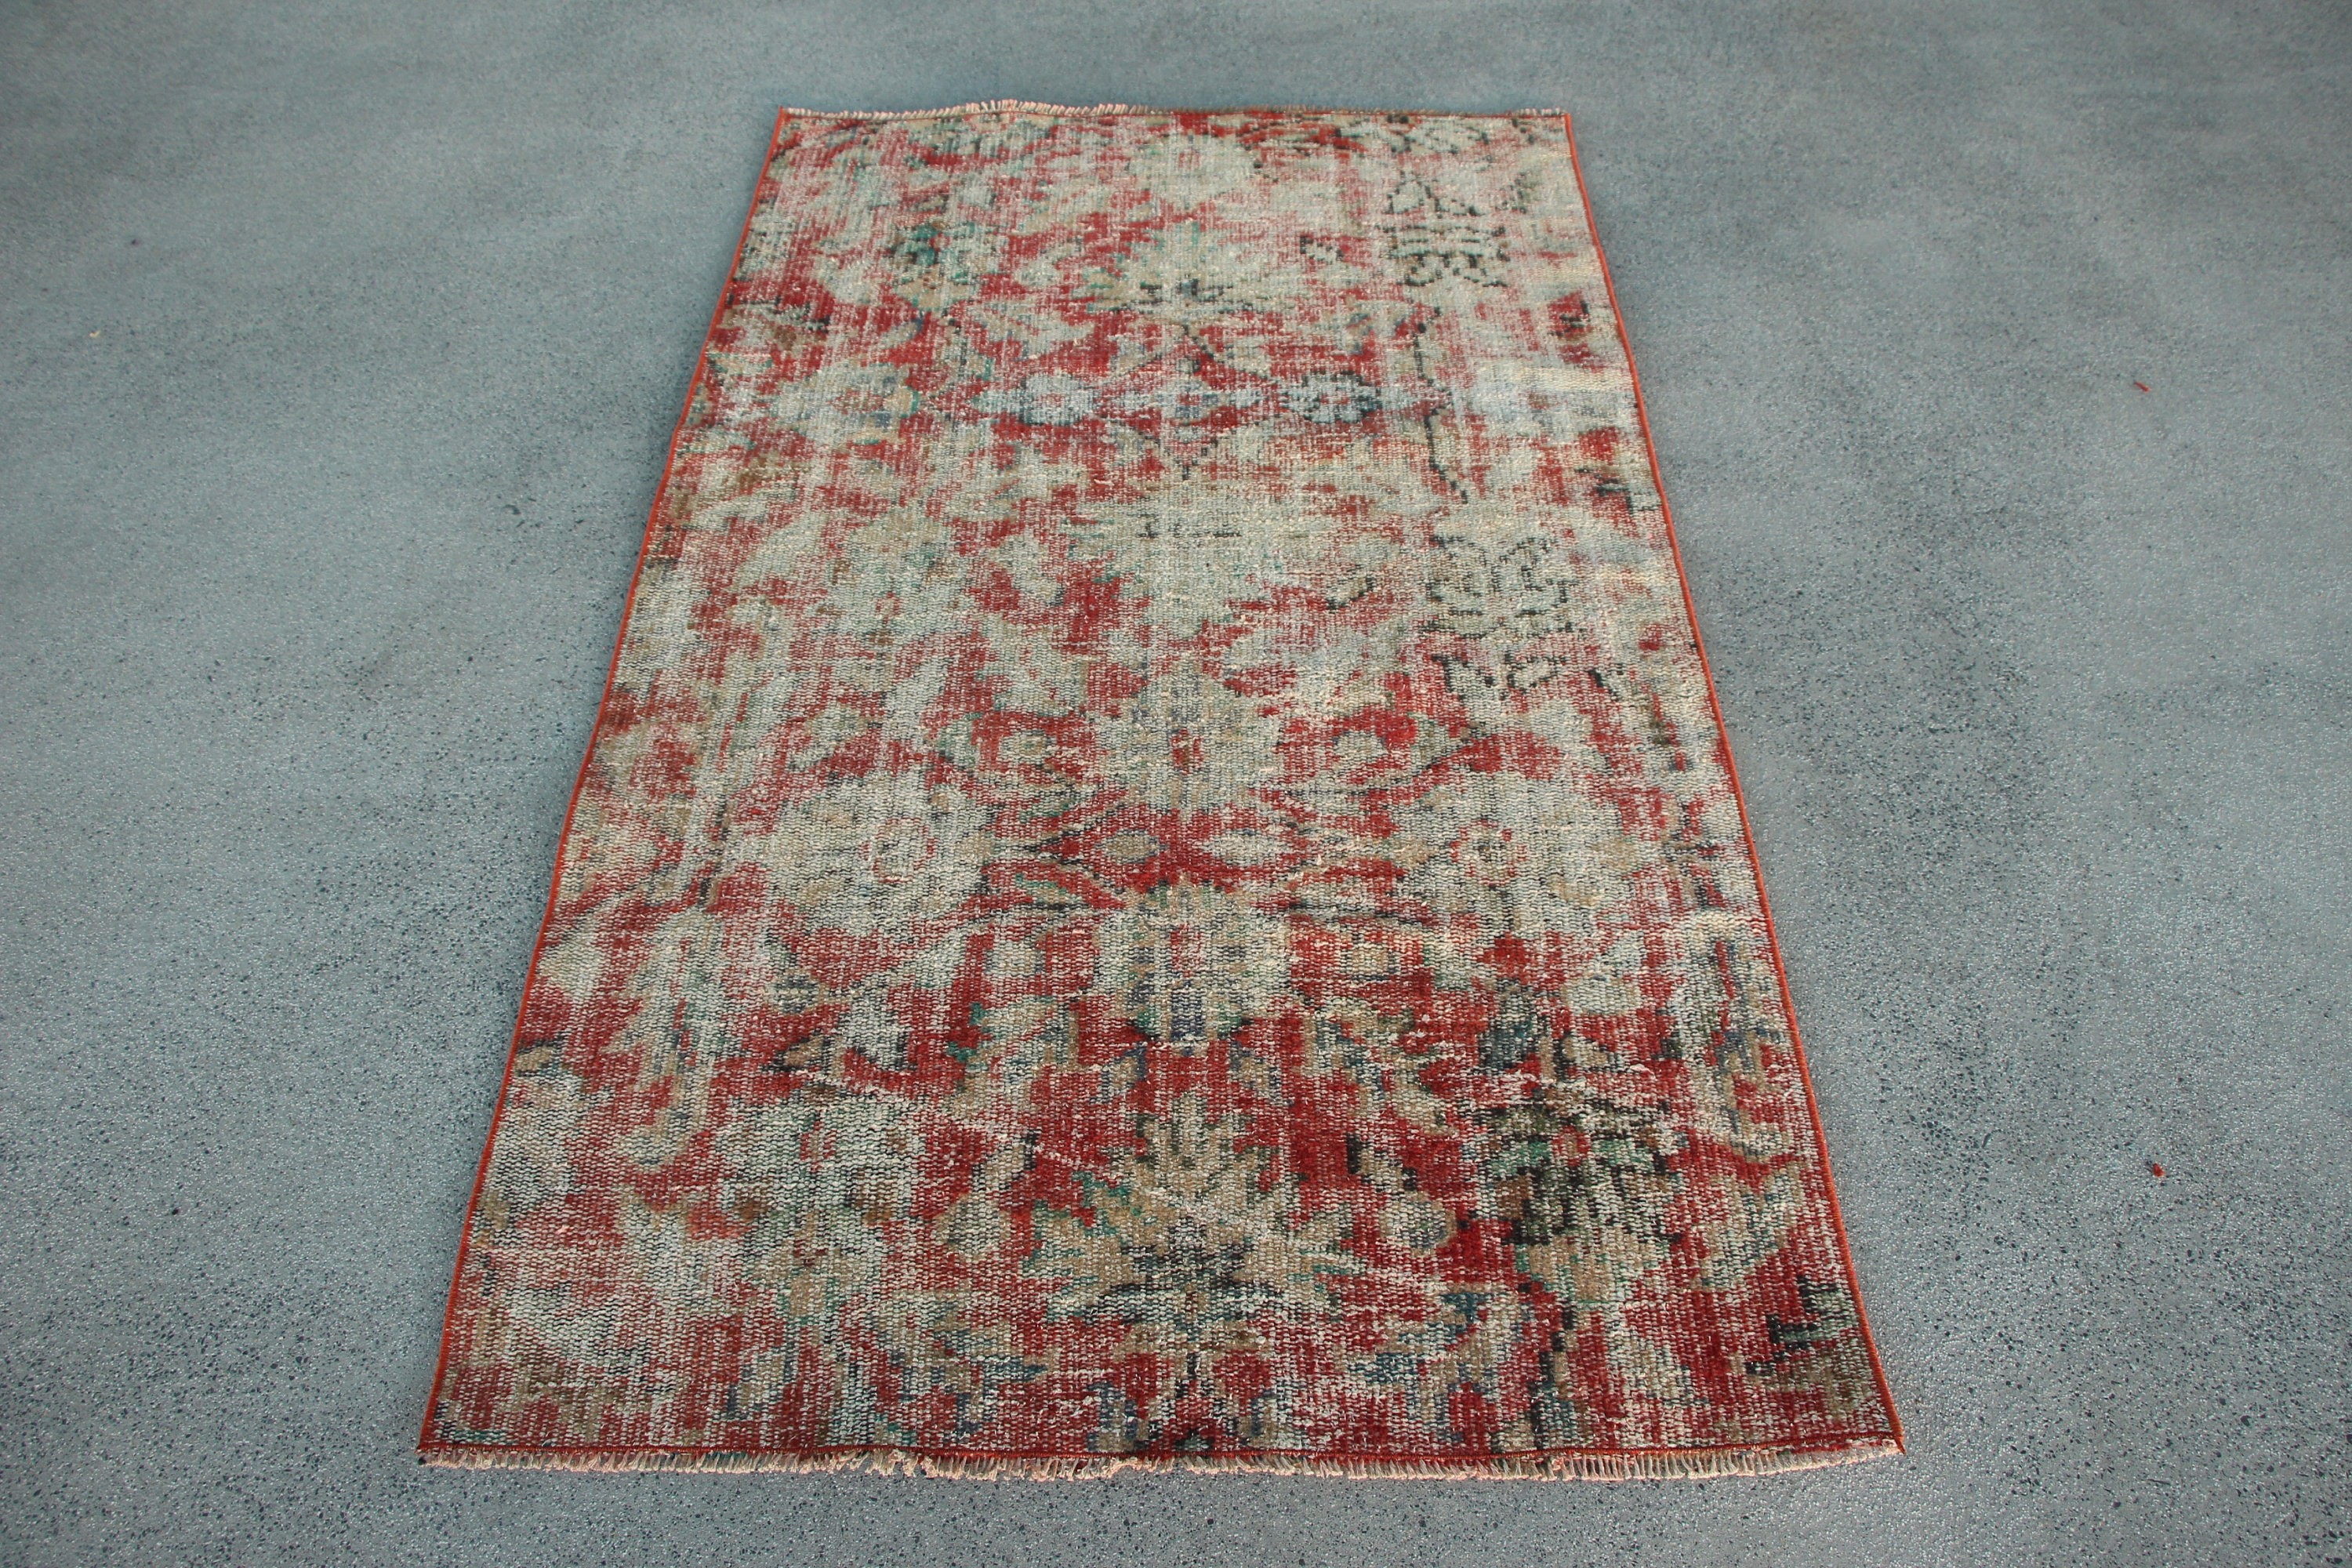 Entry Rugs, Kitchen Rug, Ethnic Rug, Oushak Rug, Red Cool Rugs, Rugs for Entry, Turkish Rug, Tribal Rug, 3.3x5.6 ft Accent Rug, Vintage Rug